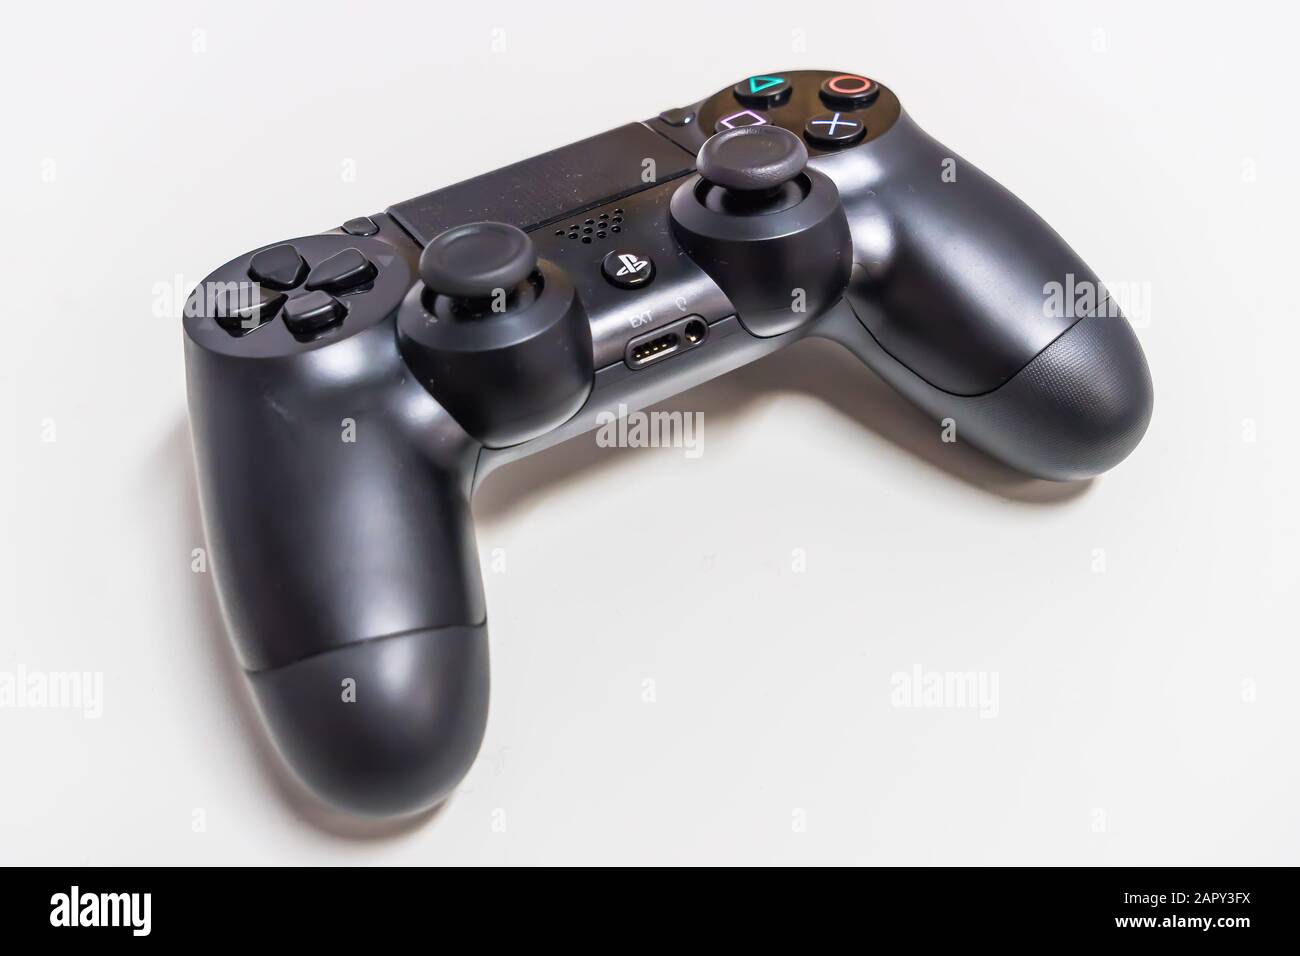 Sony Play Station 4 Pro Gaming Console On The Table With Two Joysticks And  Some Games On Dvd For Ps4 Stock Photo - Download Image Now - iStock